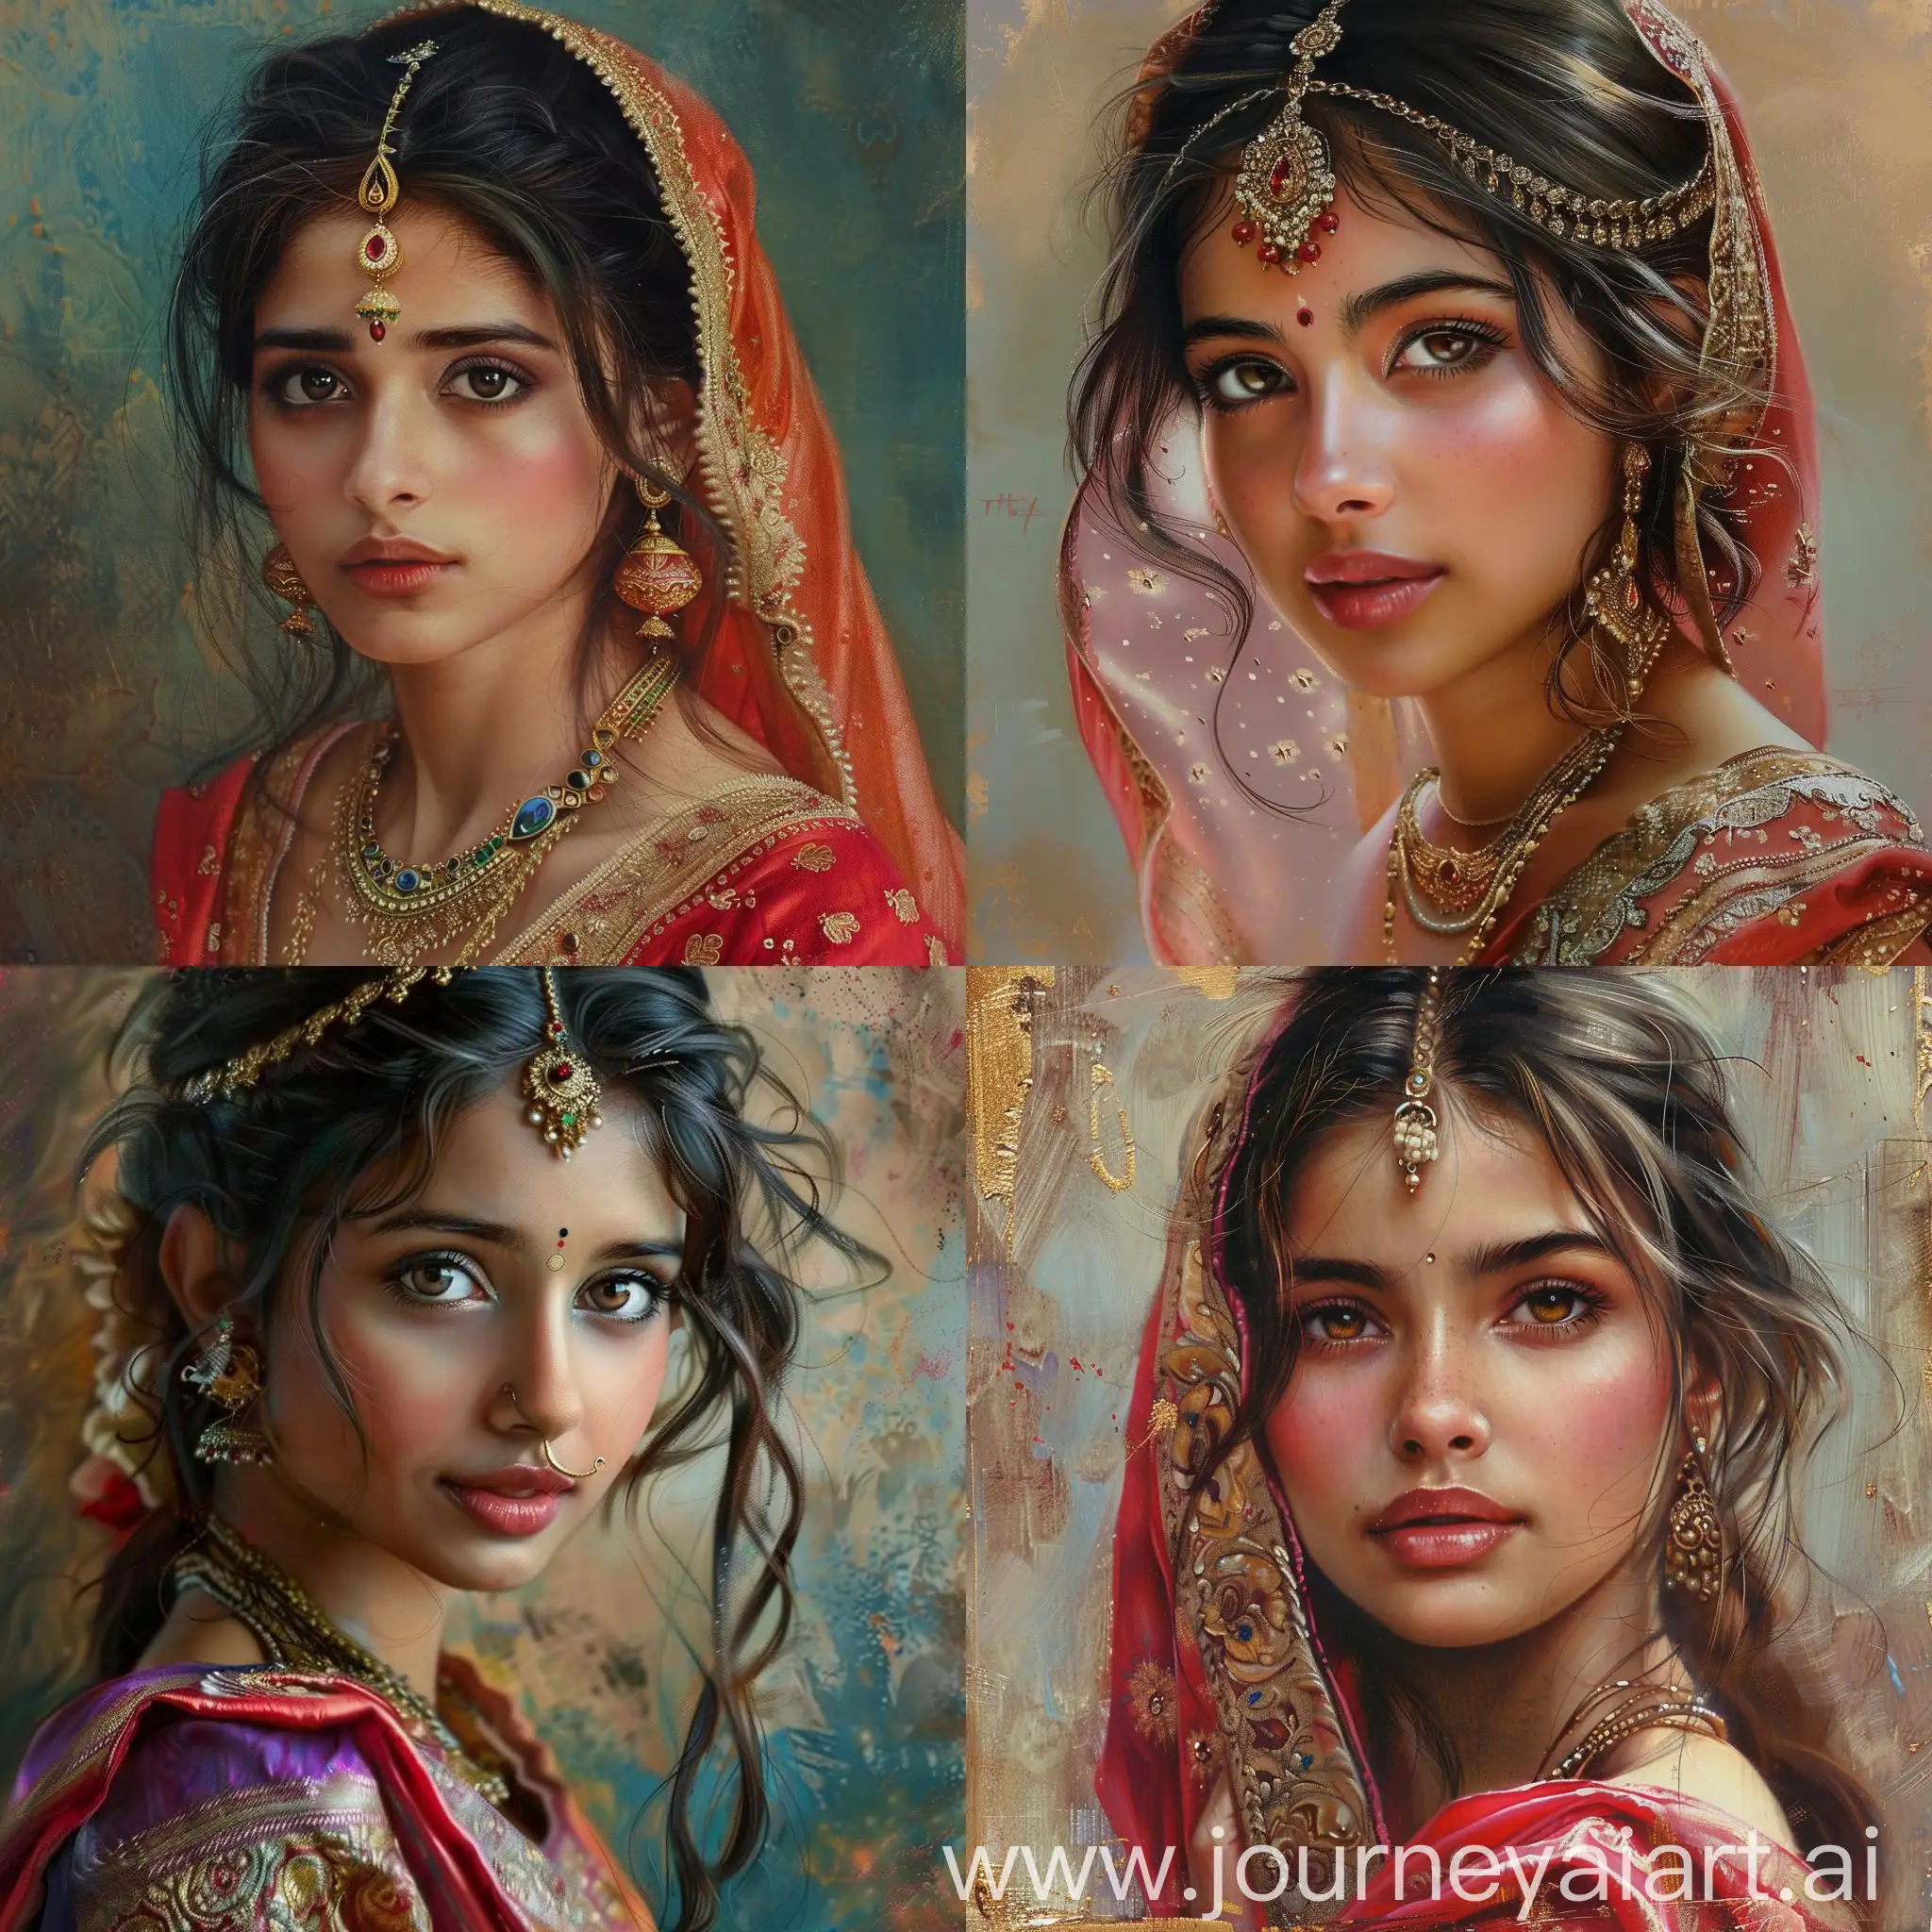 Indian-Beautiful-Girl-Portrait-with-Traditional-Attire-and-Ornate-Jewelry